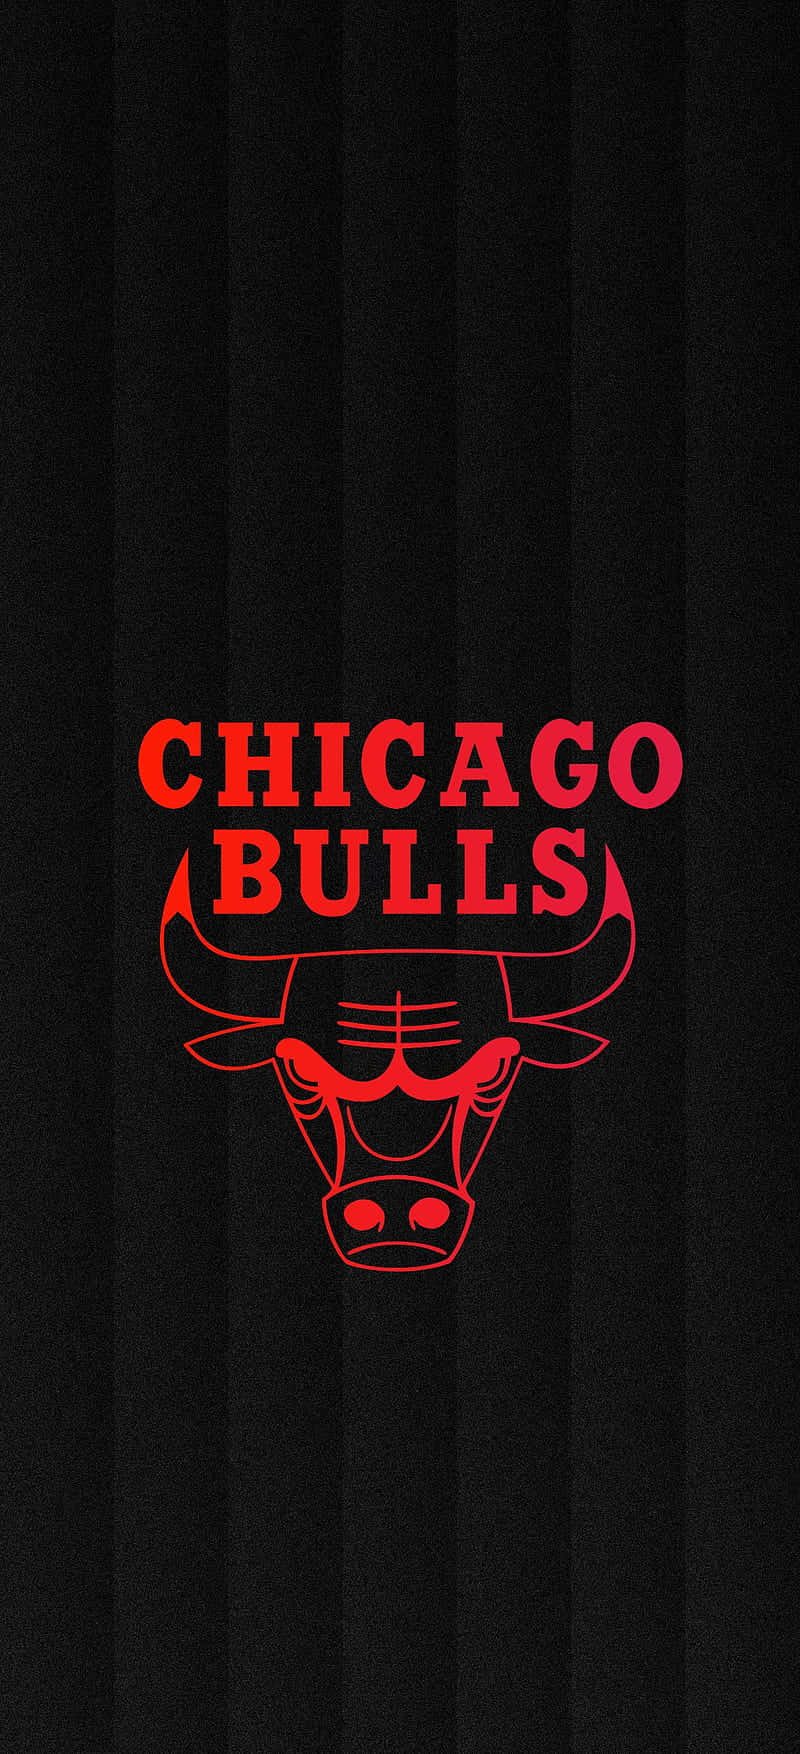 Get Ready To Cheer On The Chicago Bulls With This Glorious Phone Wallpaper! Background